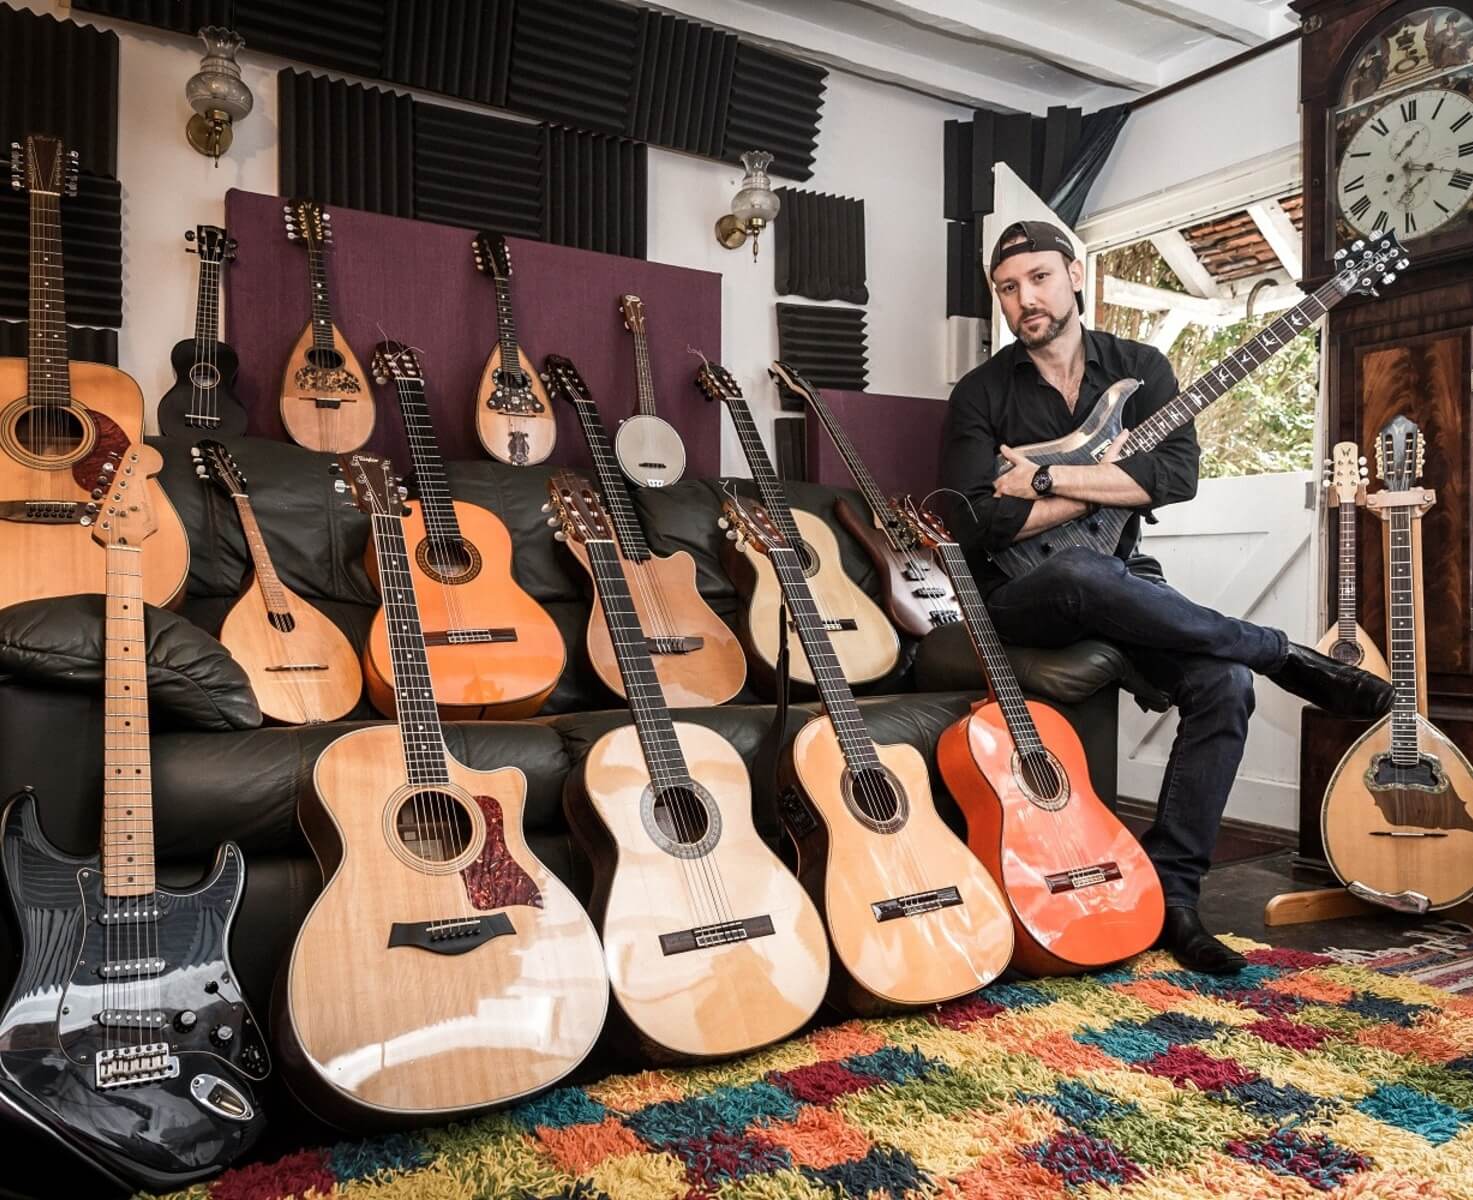 Tony Calvo and some of his guitars in his home studio where he recorded Latin Guitar Underworld library album